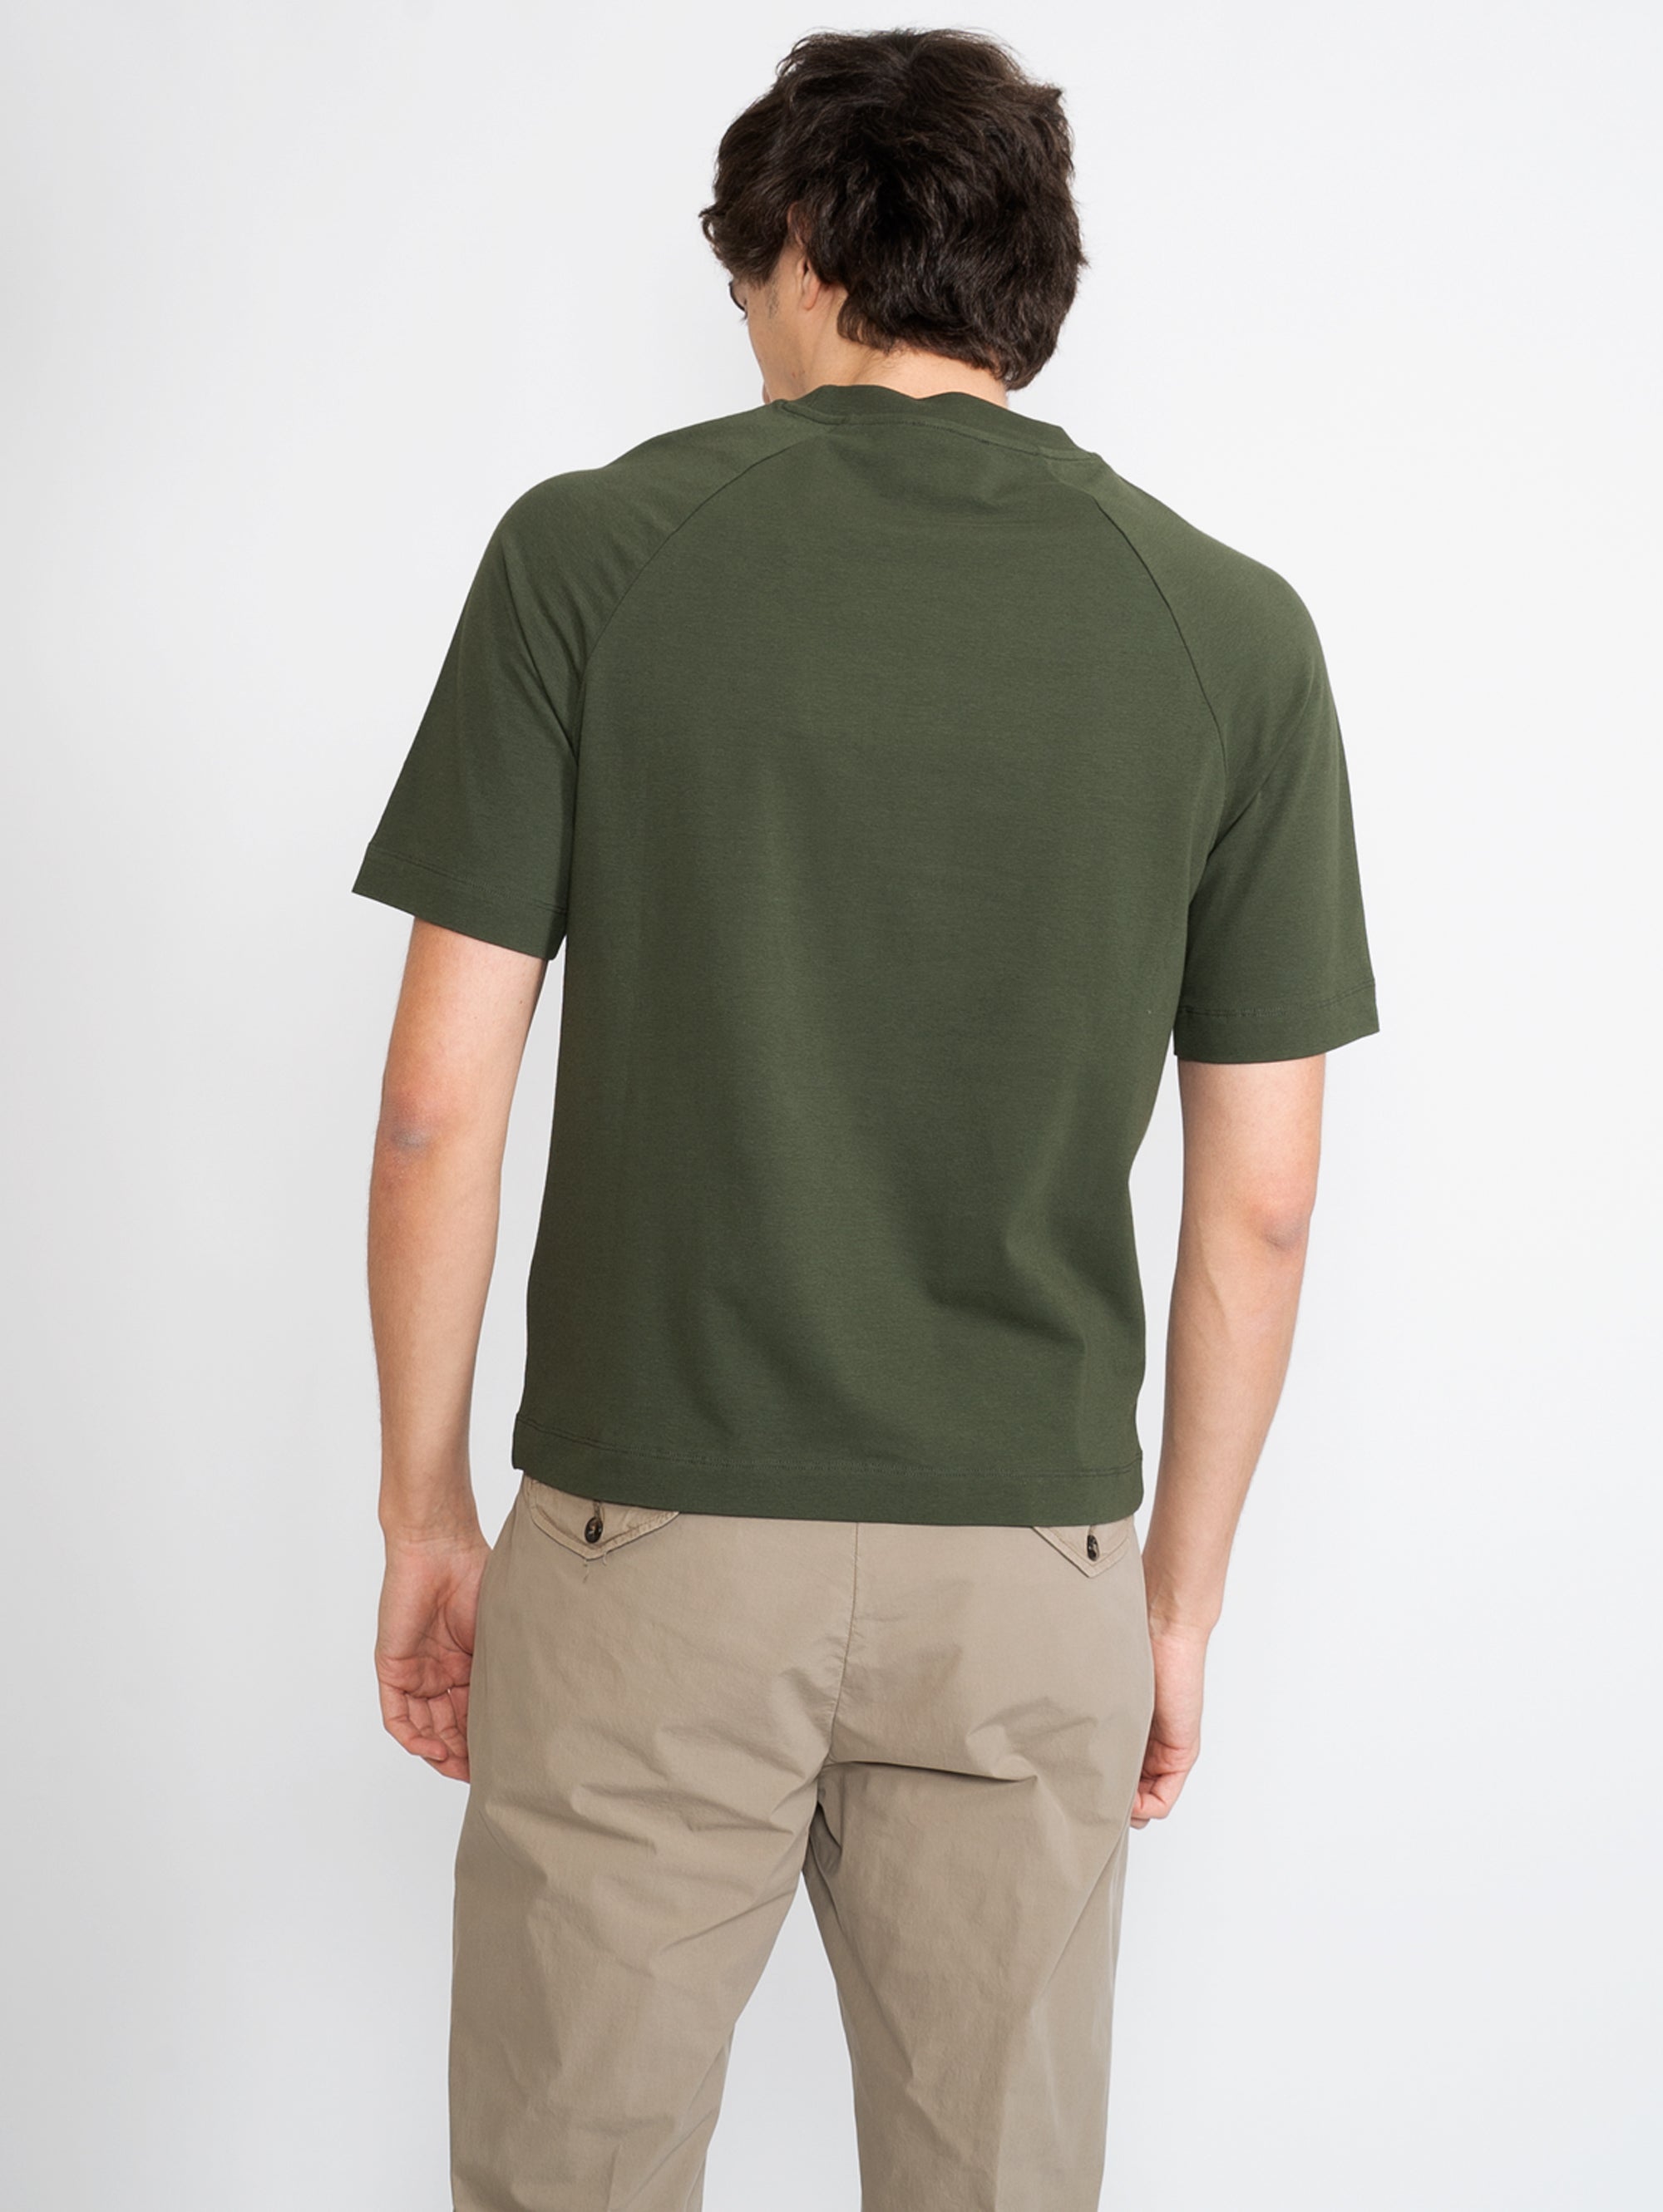 T-shirt with Green Pocket